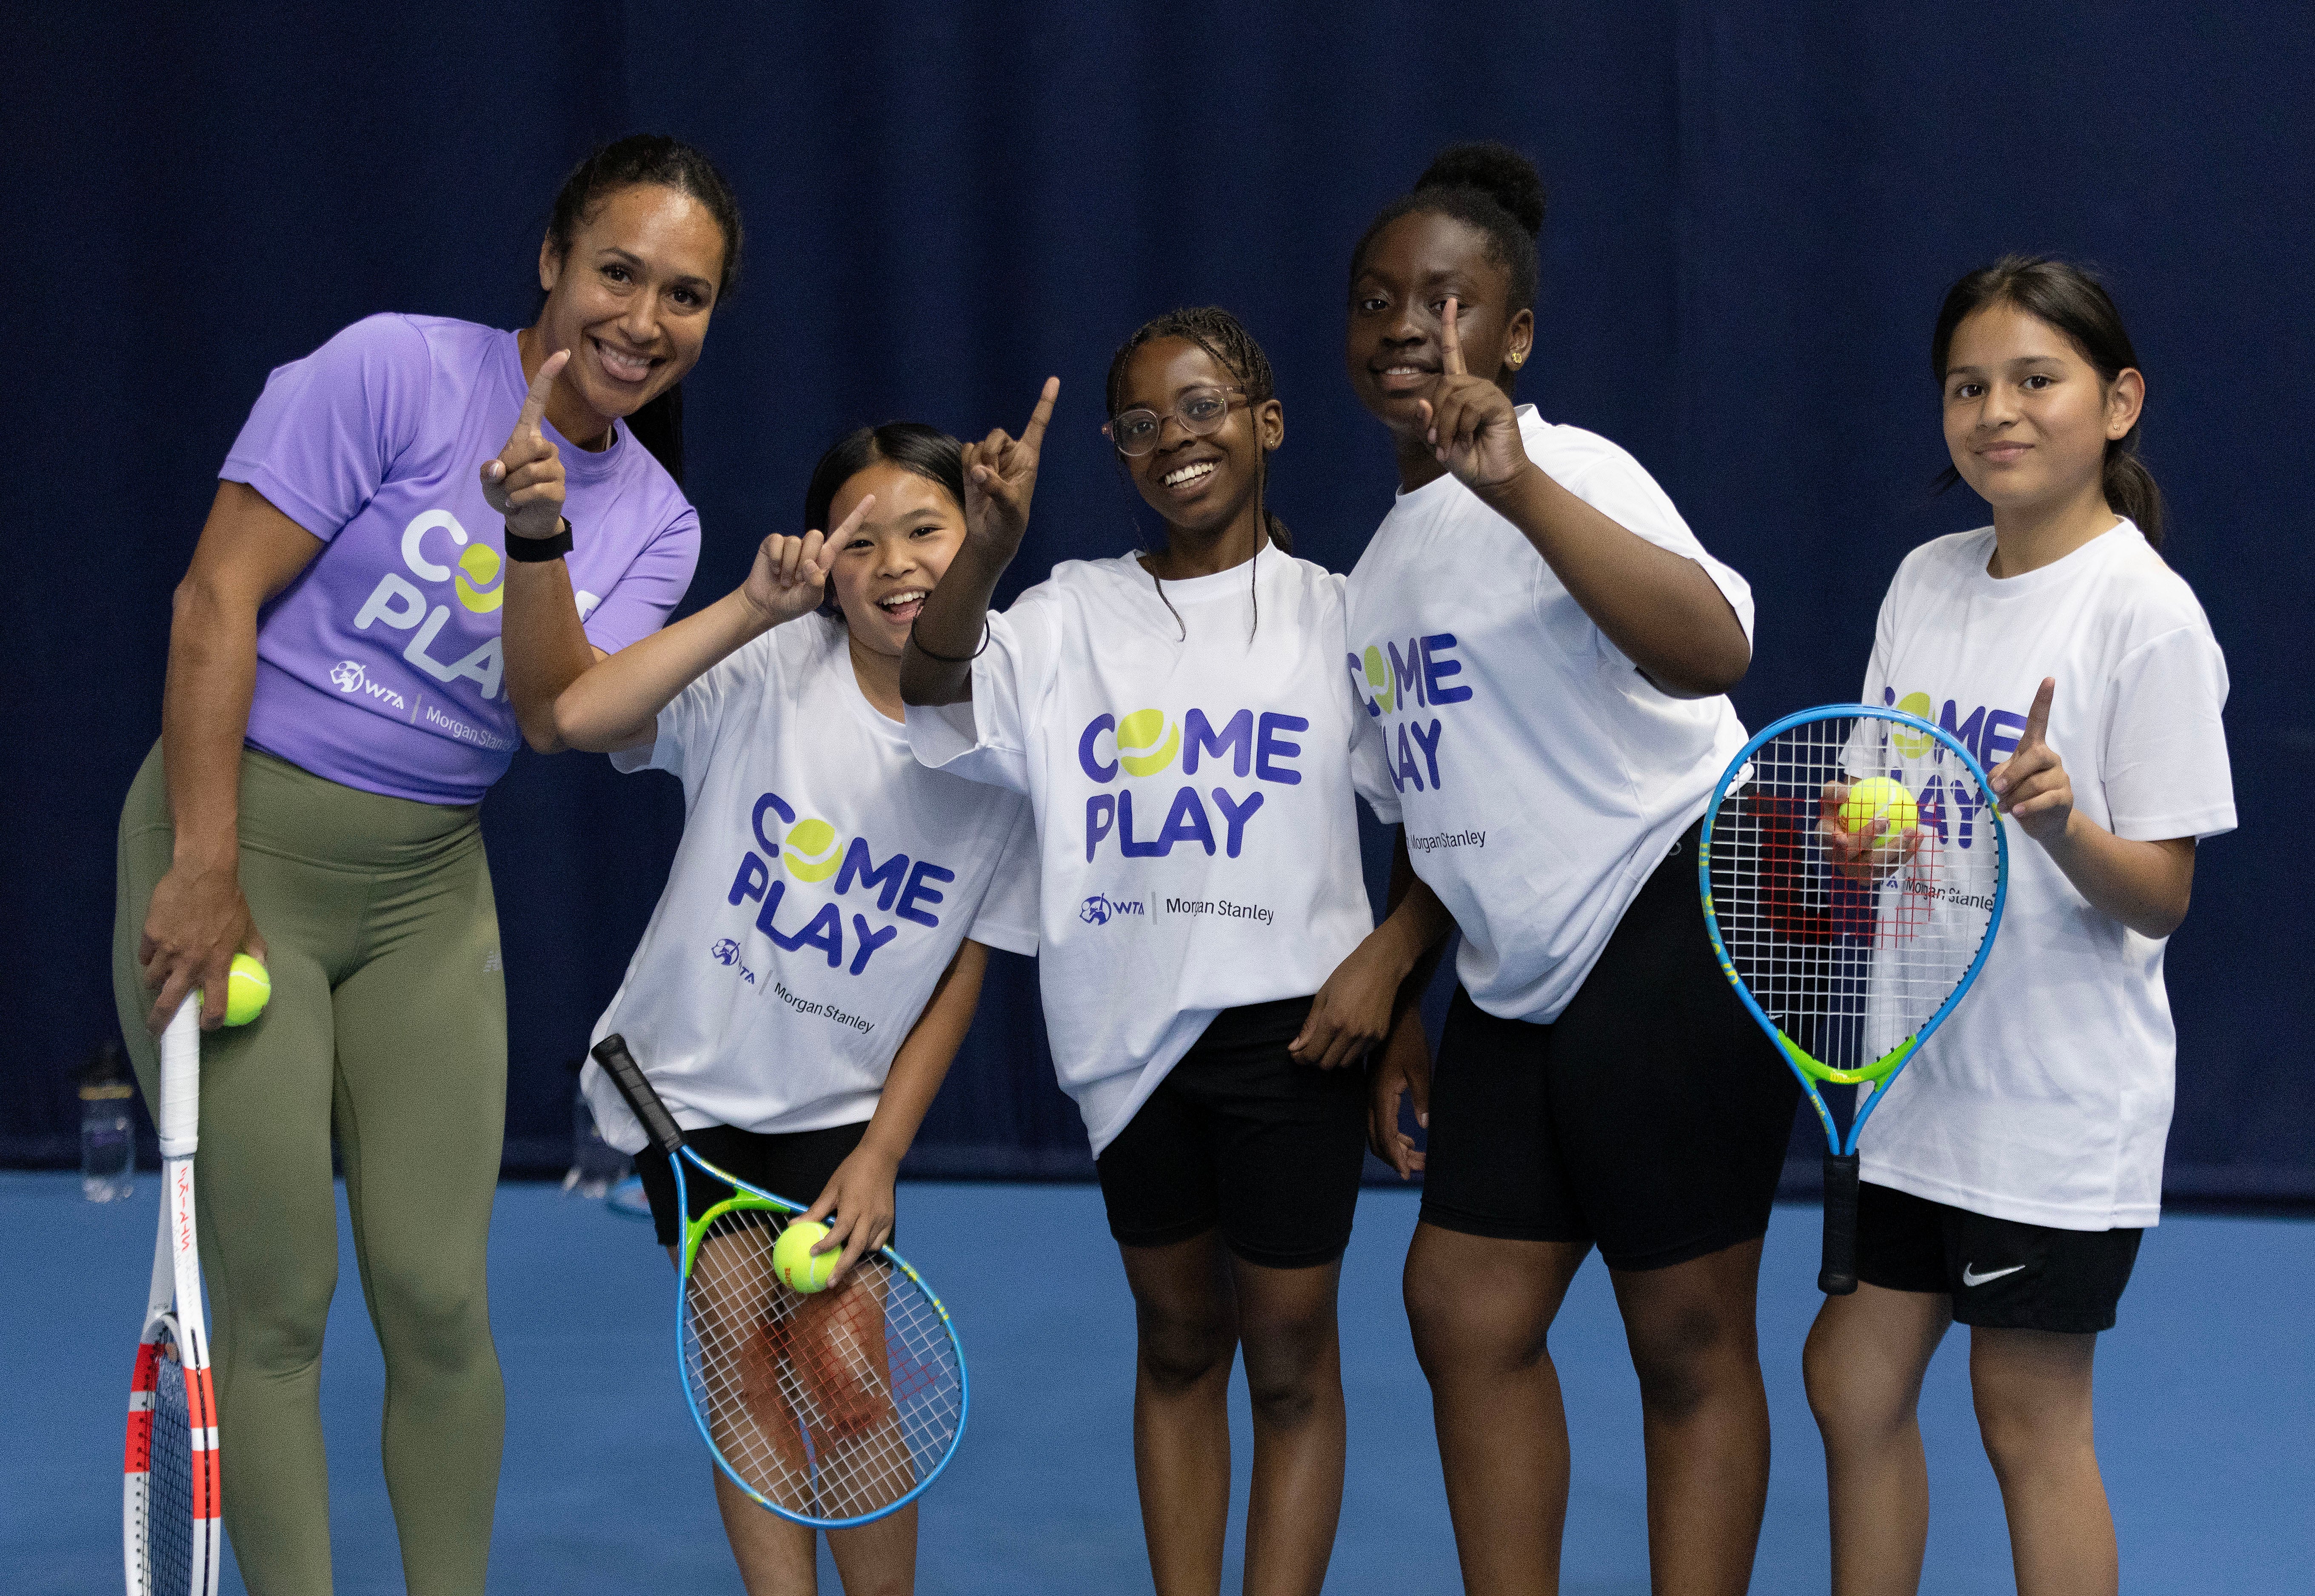 pa ready, heather watson, morgan stanley, judy murray, london, british, ipswich, national tennis centre, scotland, elena baltacha ‘would have loved’ impact her foundation is having on tennis